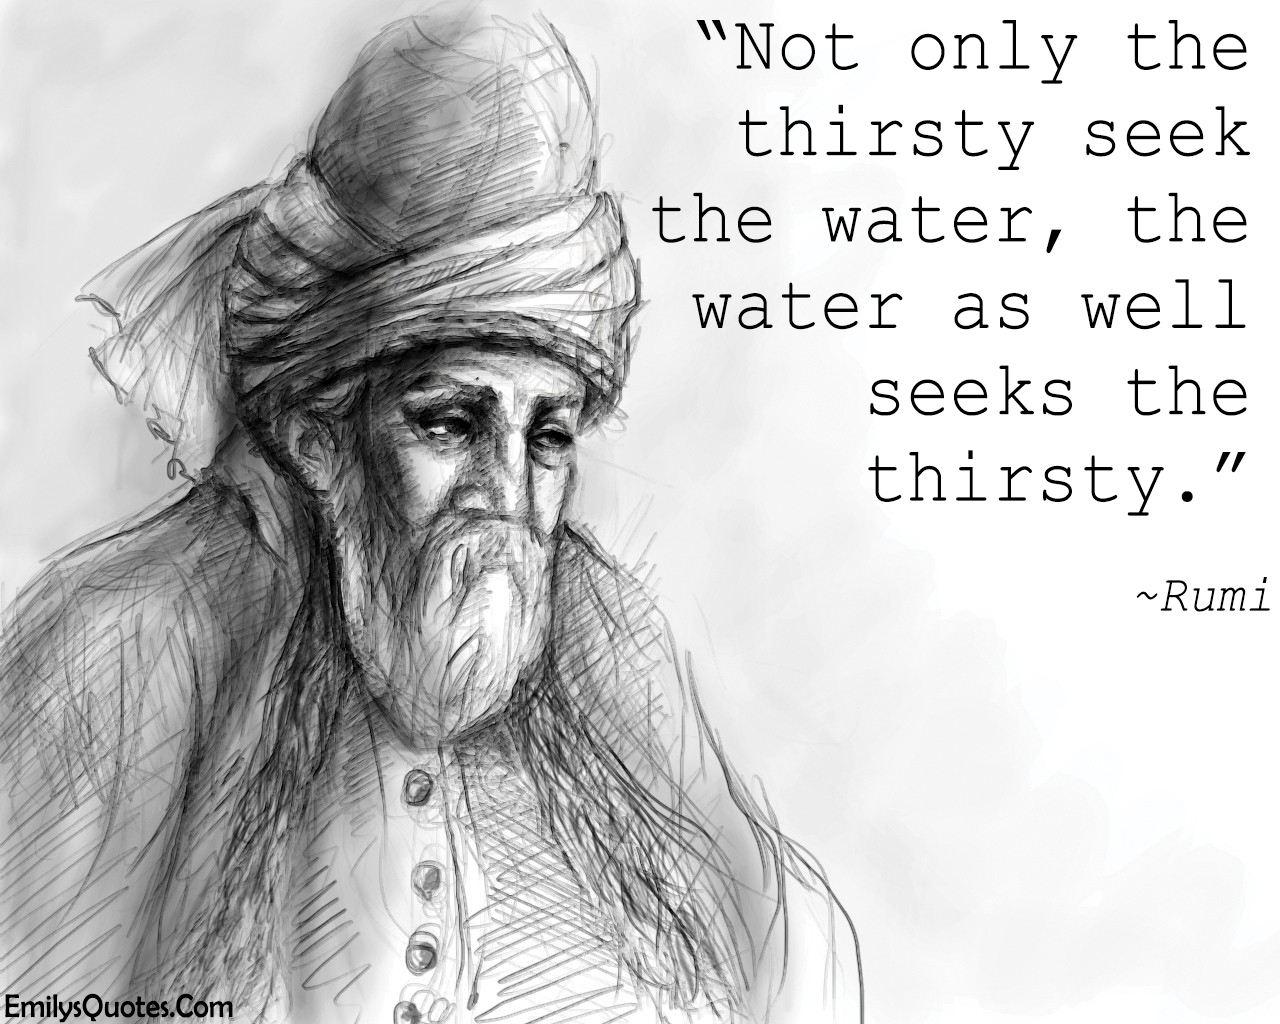 Not only the thirsty seek the water, the water as well seeks the thirsty